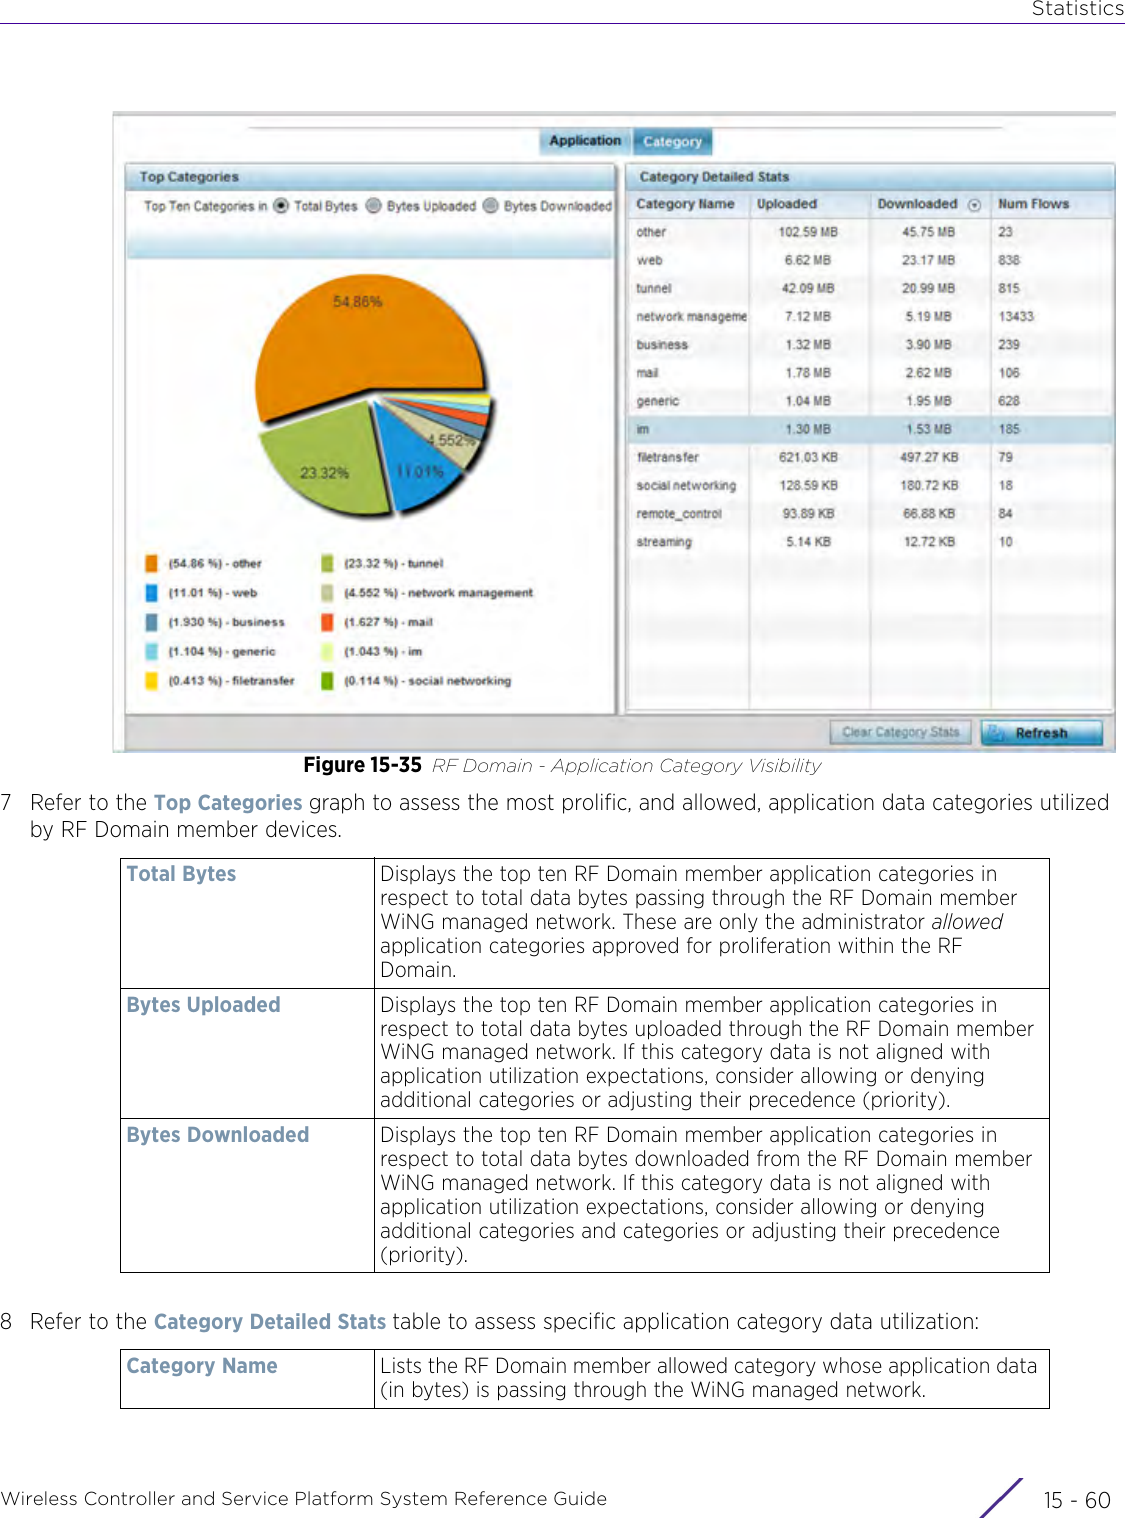 StatisticsWireless Controller and Service Platform System Reference Guide  15 - 60Figure 15-35 RF Domain - Application Category Visibility7 Refer to the Top Categories graph to assess the most prolific, and allowed, application data categories utilized by RF Domain member devices. 8 Refer to the Category Detailed Stats table to assess specific application category data utilization: Total Bytes Displays the top ten RF Domain member application categories in respect to total data bytes passing through the RF Domain member WiNG managed network. These are only the administrator allowed application categories approved for proliferation within the RF Domain.Bytes Uploaded Displays the top ten RF Domain member application categories in respect to total data bytes uploaded through the RF Domain member WiNG managed network. If this category data is not aligned with application utilization expectations, consider allowing or denying additional categories or adjusting their precedence (priority).Bytes Downloaded Displays the top ten RF Domain member application categories in respect to total data bytes downloaded from the RF Domain member WiNG managed network. If this category data is not aligned with application utilization expectations, consider allowing or denying additional categories and categories or adjusting their precedence (priority).Category Name Lists the RF Domain member allowed category whose application data (in bytes) is passing through the WiNG managed network.